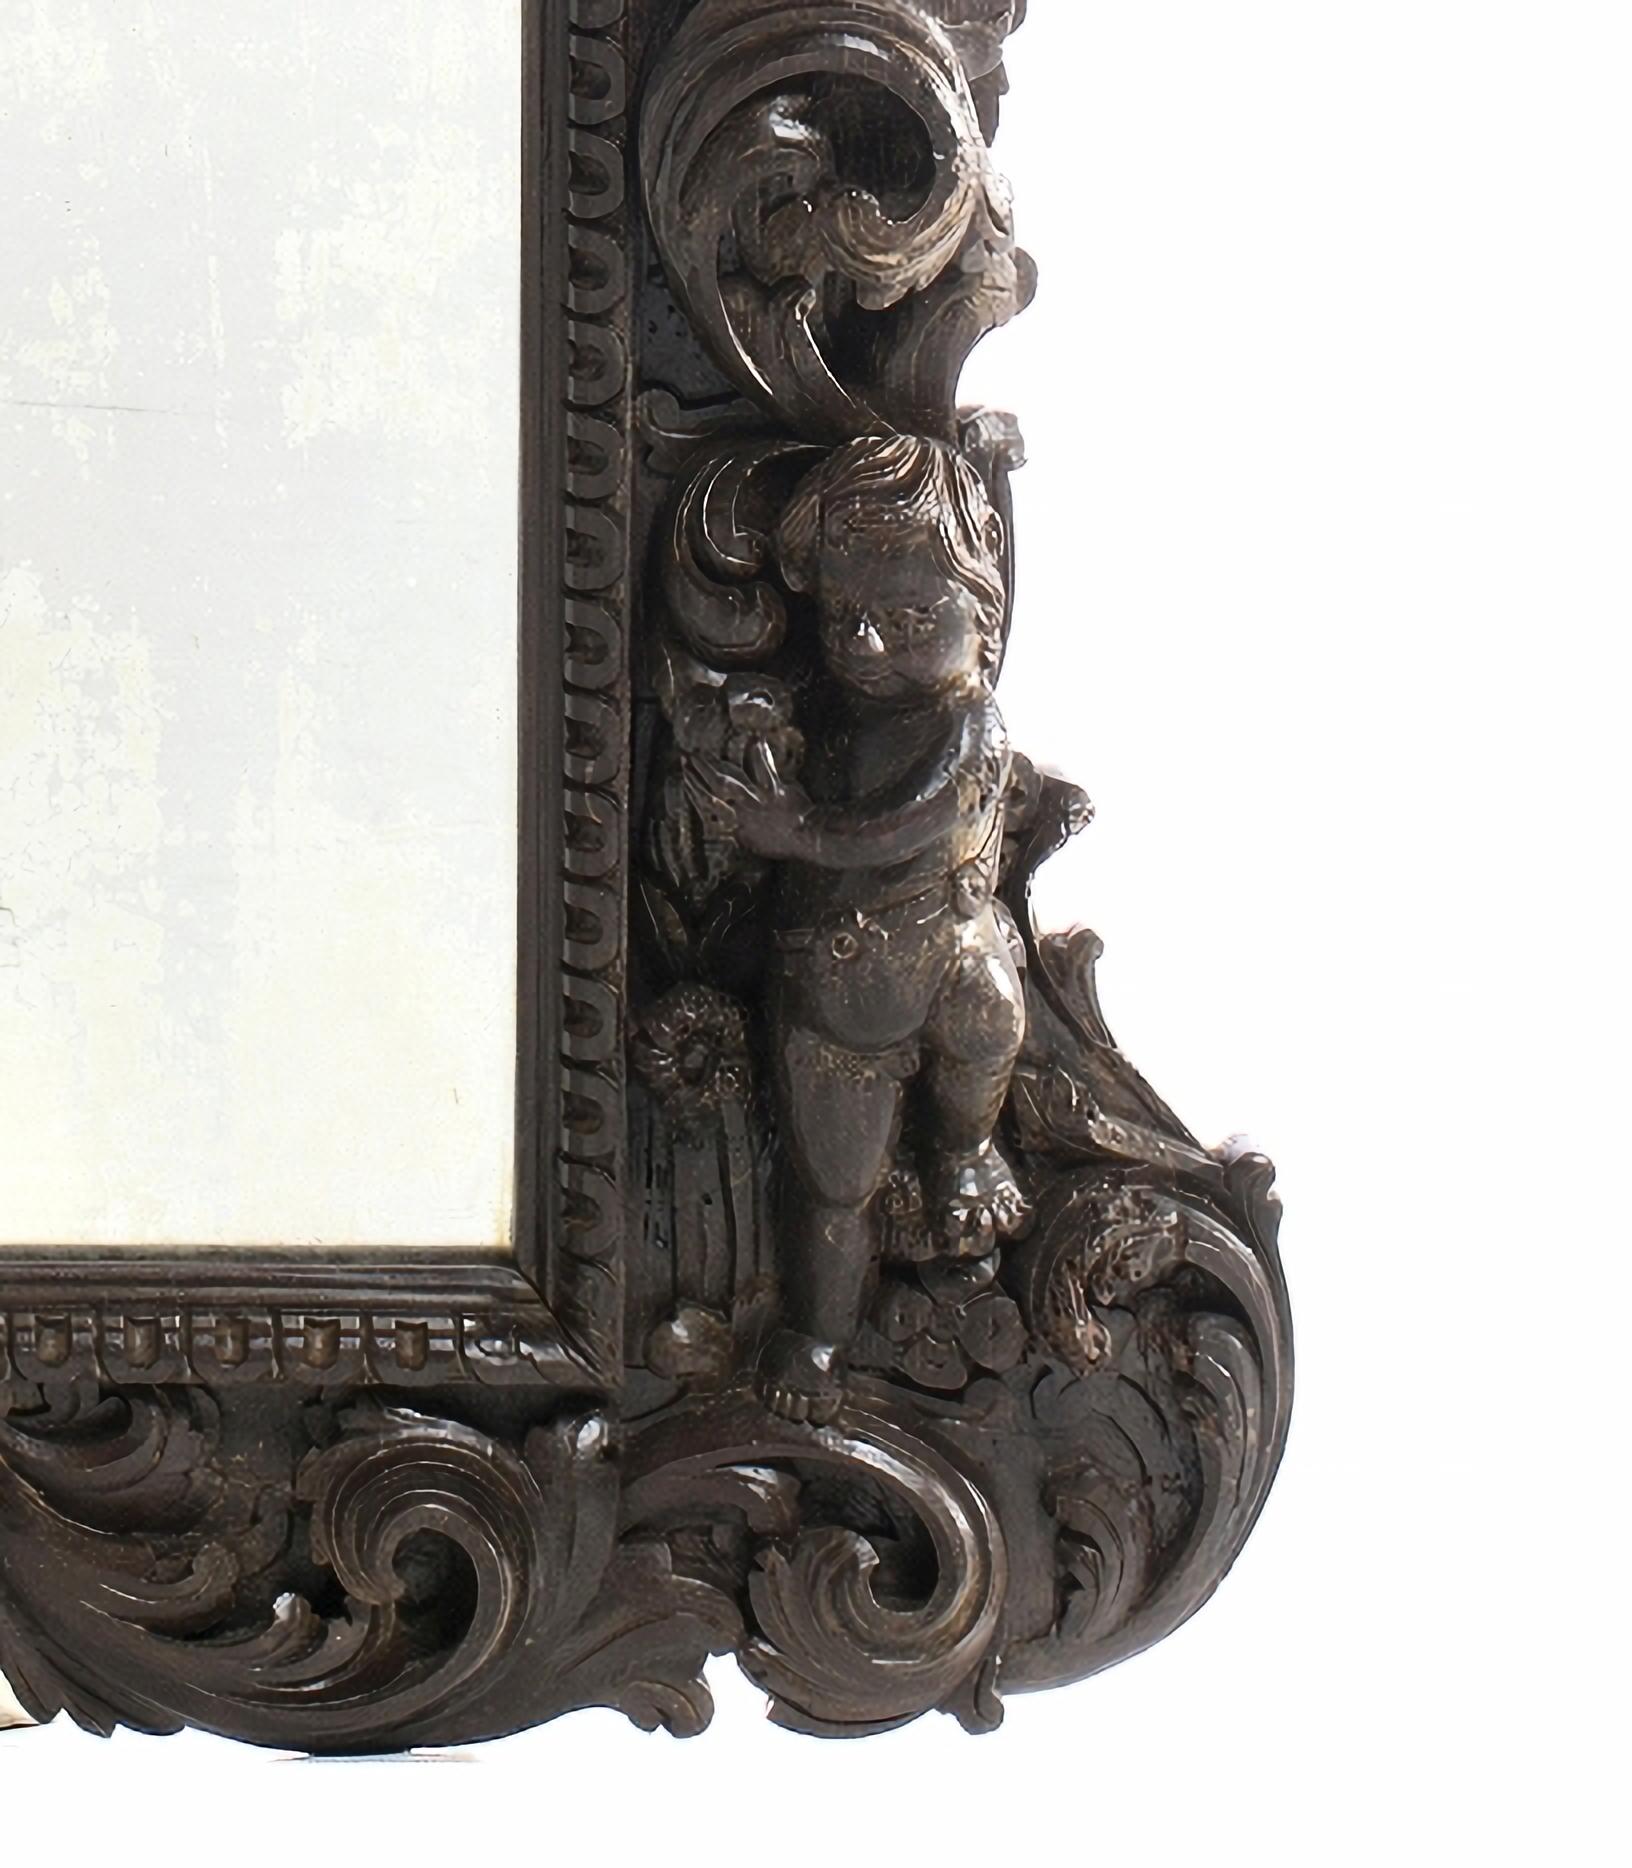 Portuguese Mirror
19th Century, in chestnut wood with carvings finished with 